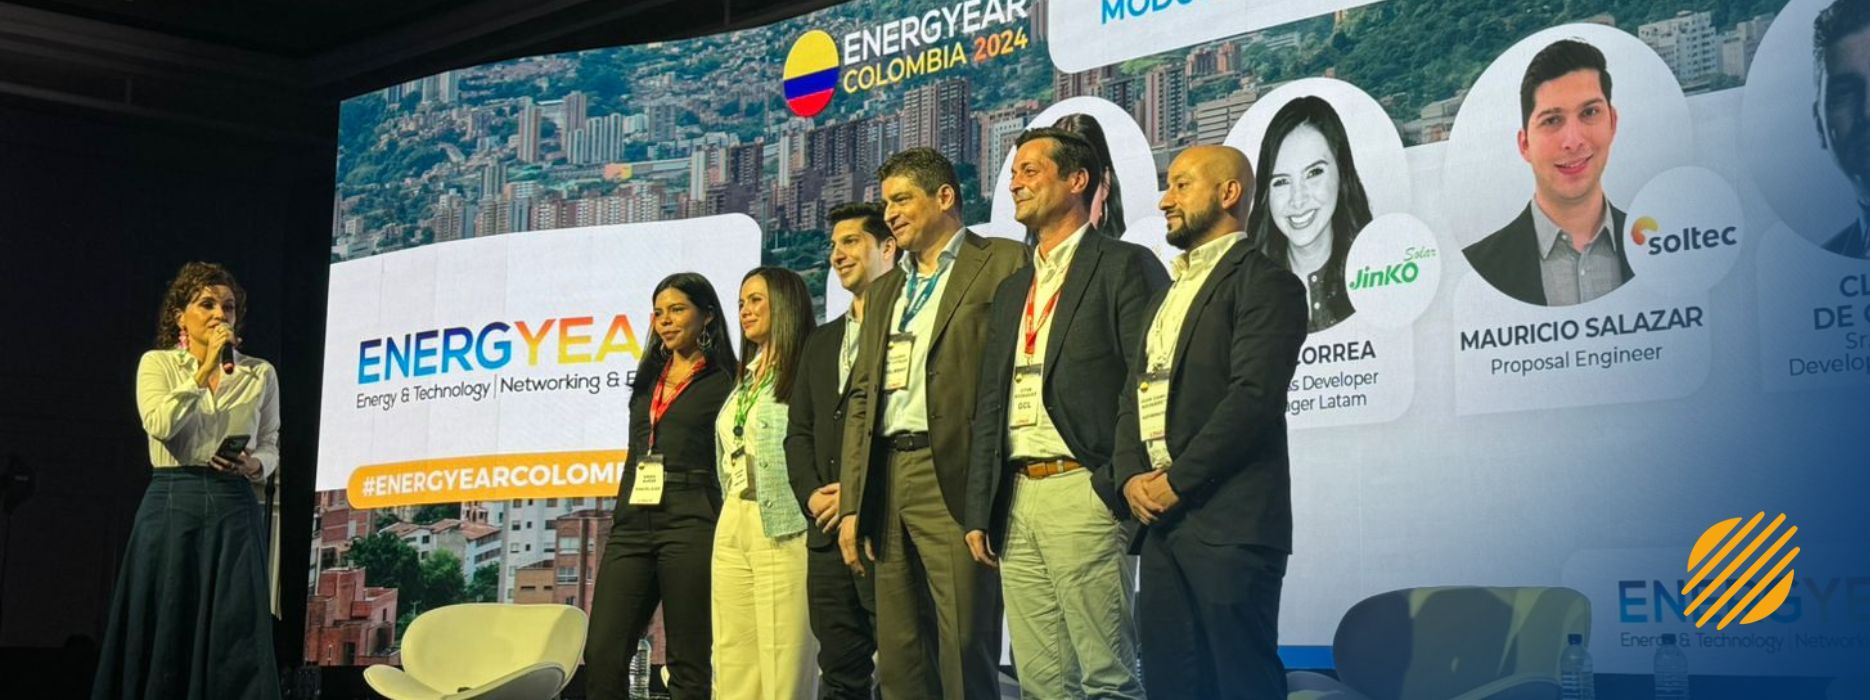 ENERGYEAR COLOMBIA 2024